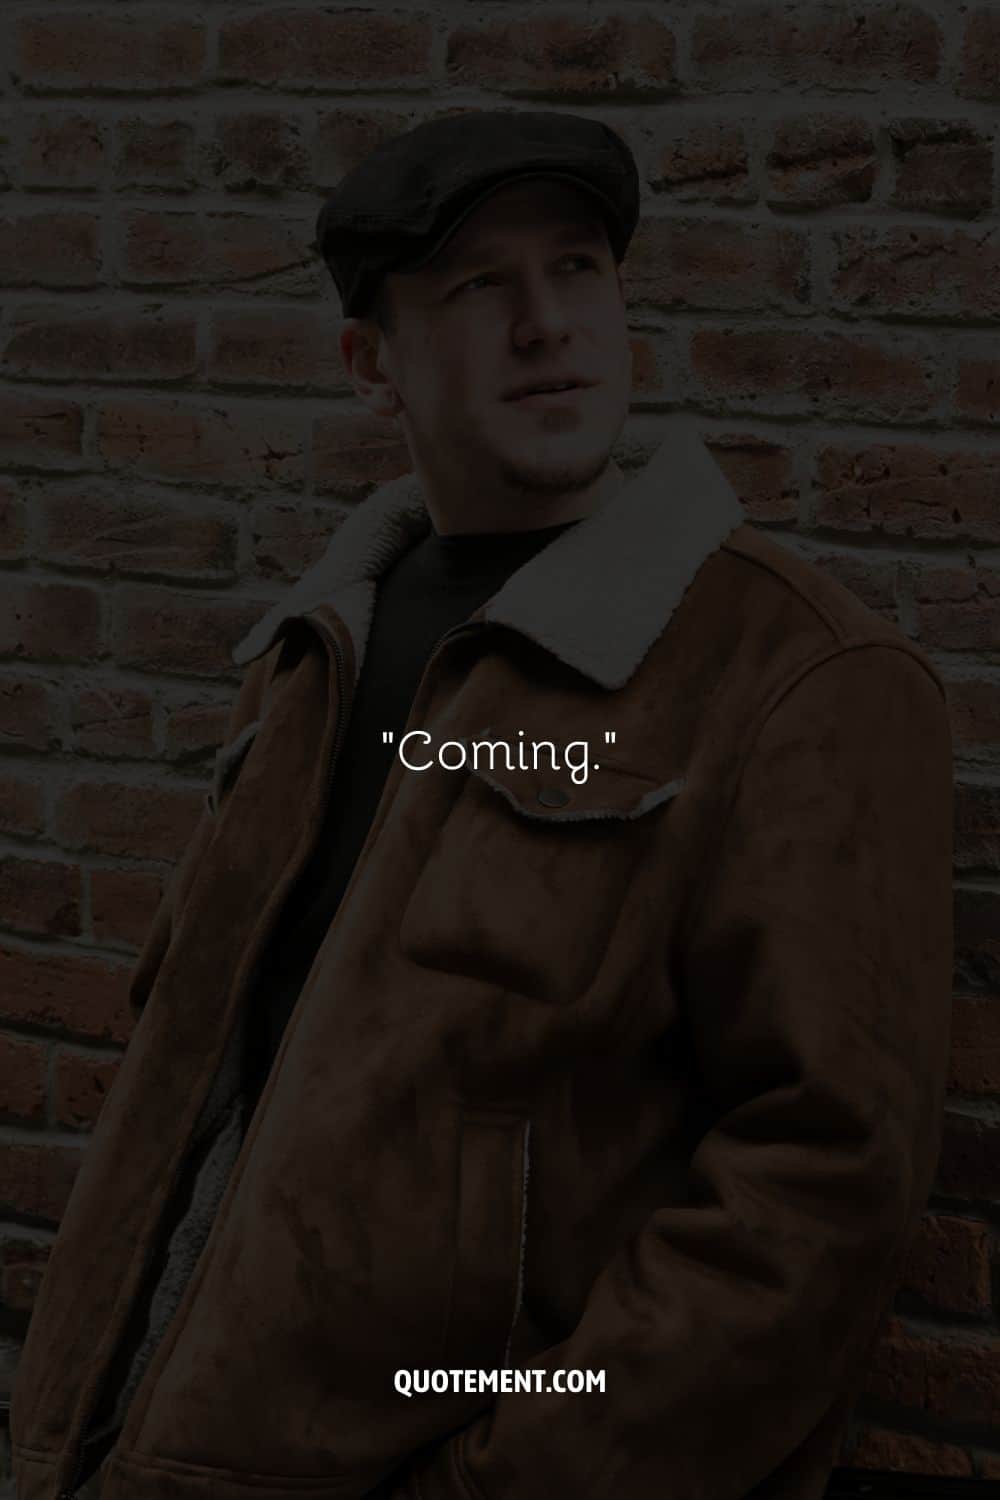 “Coming.”